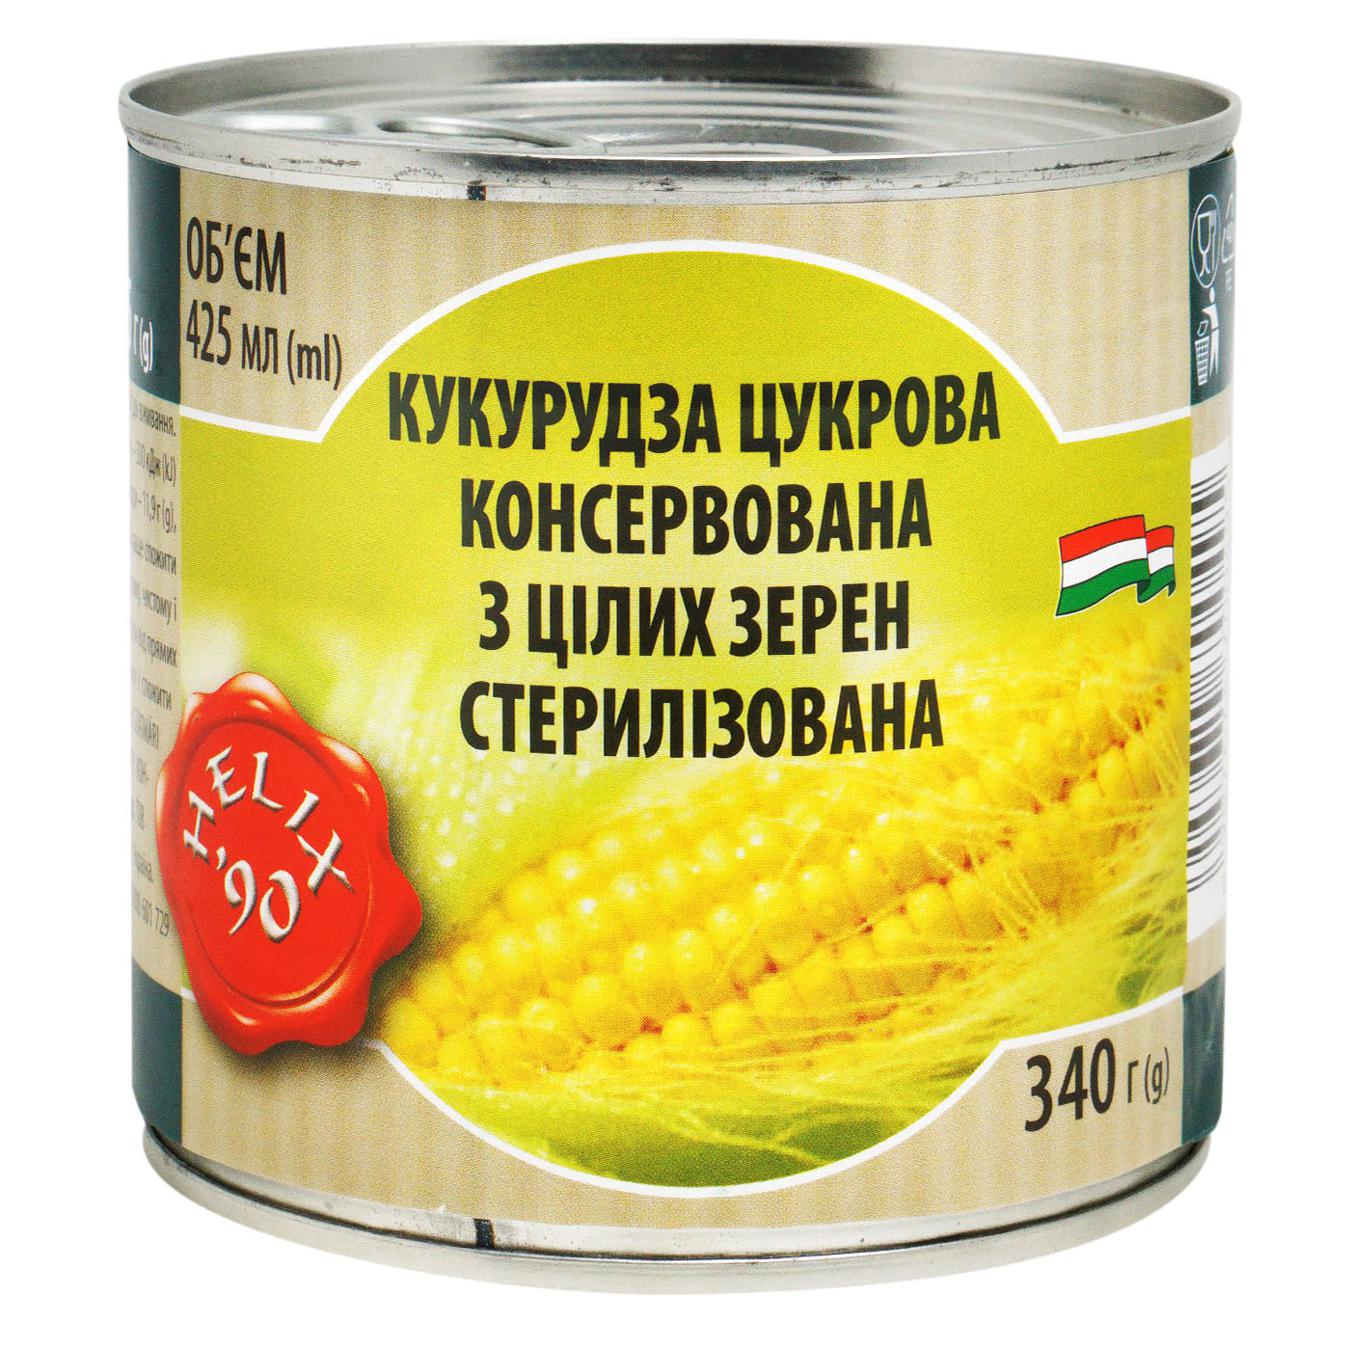 Corn HELIX super sweet canned iron can 425 ml